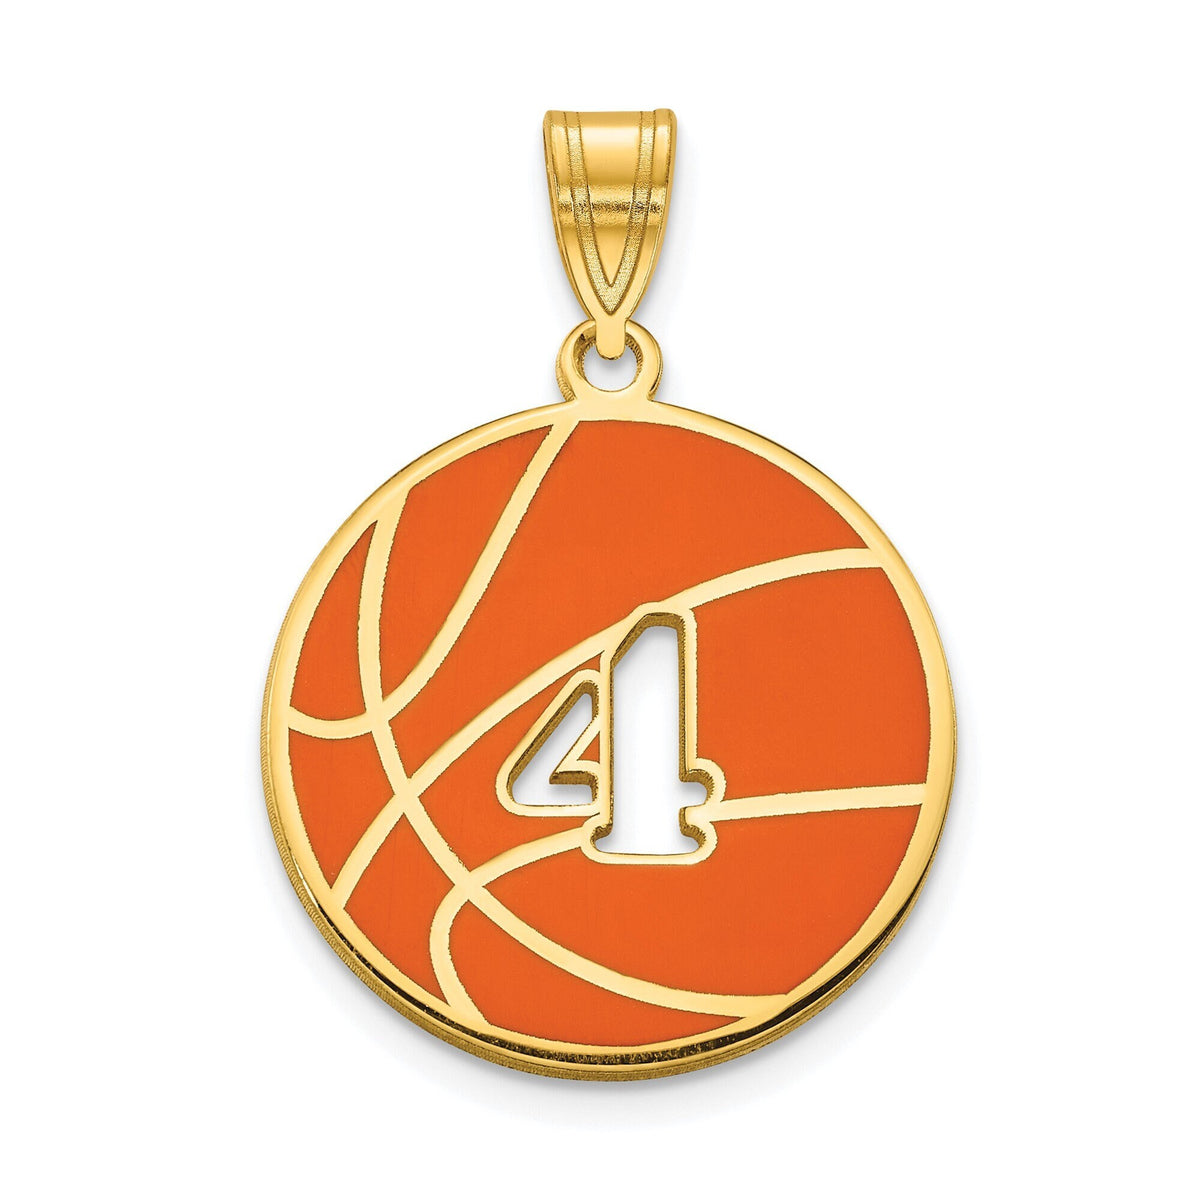 Basketball Number Cut Out Pendant Orange Enamel With Necklace in Sterling Silver , Gold Plated Silver or 10k Gold